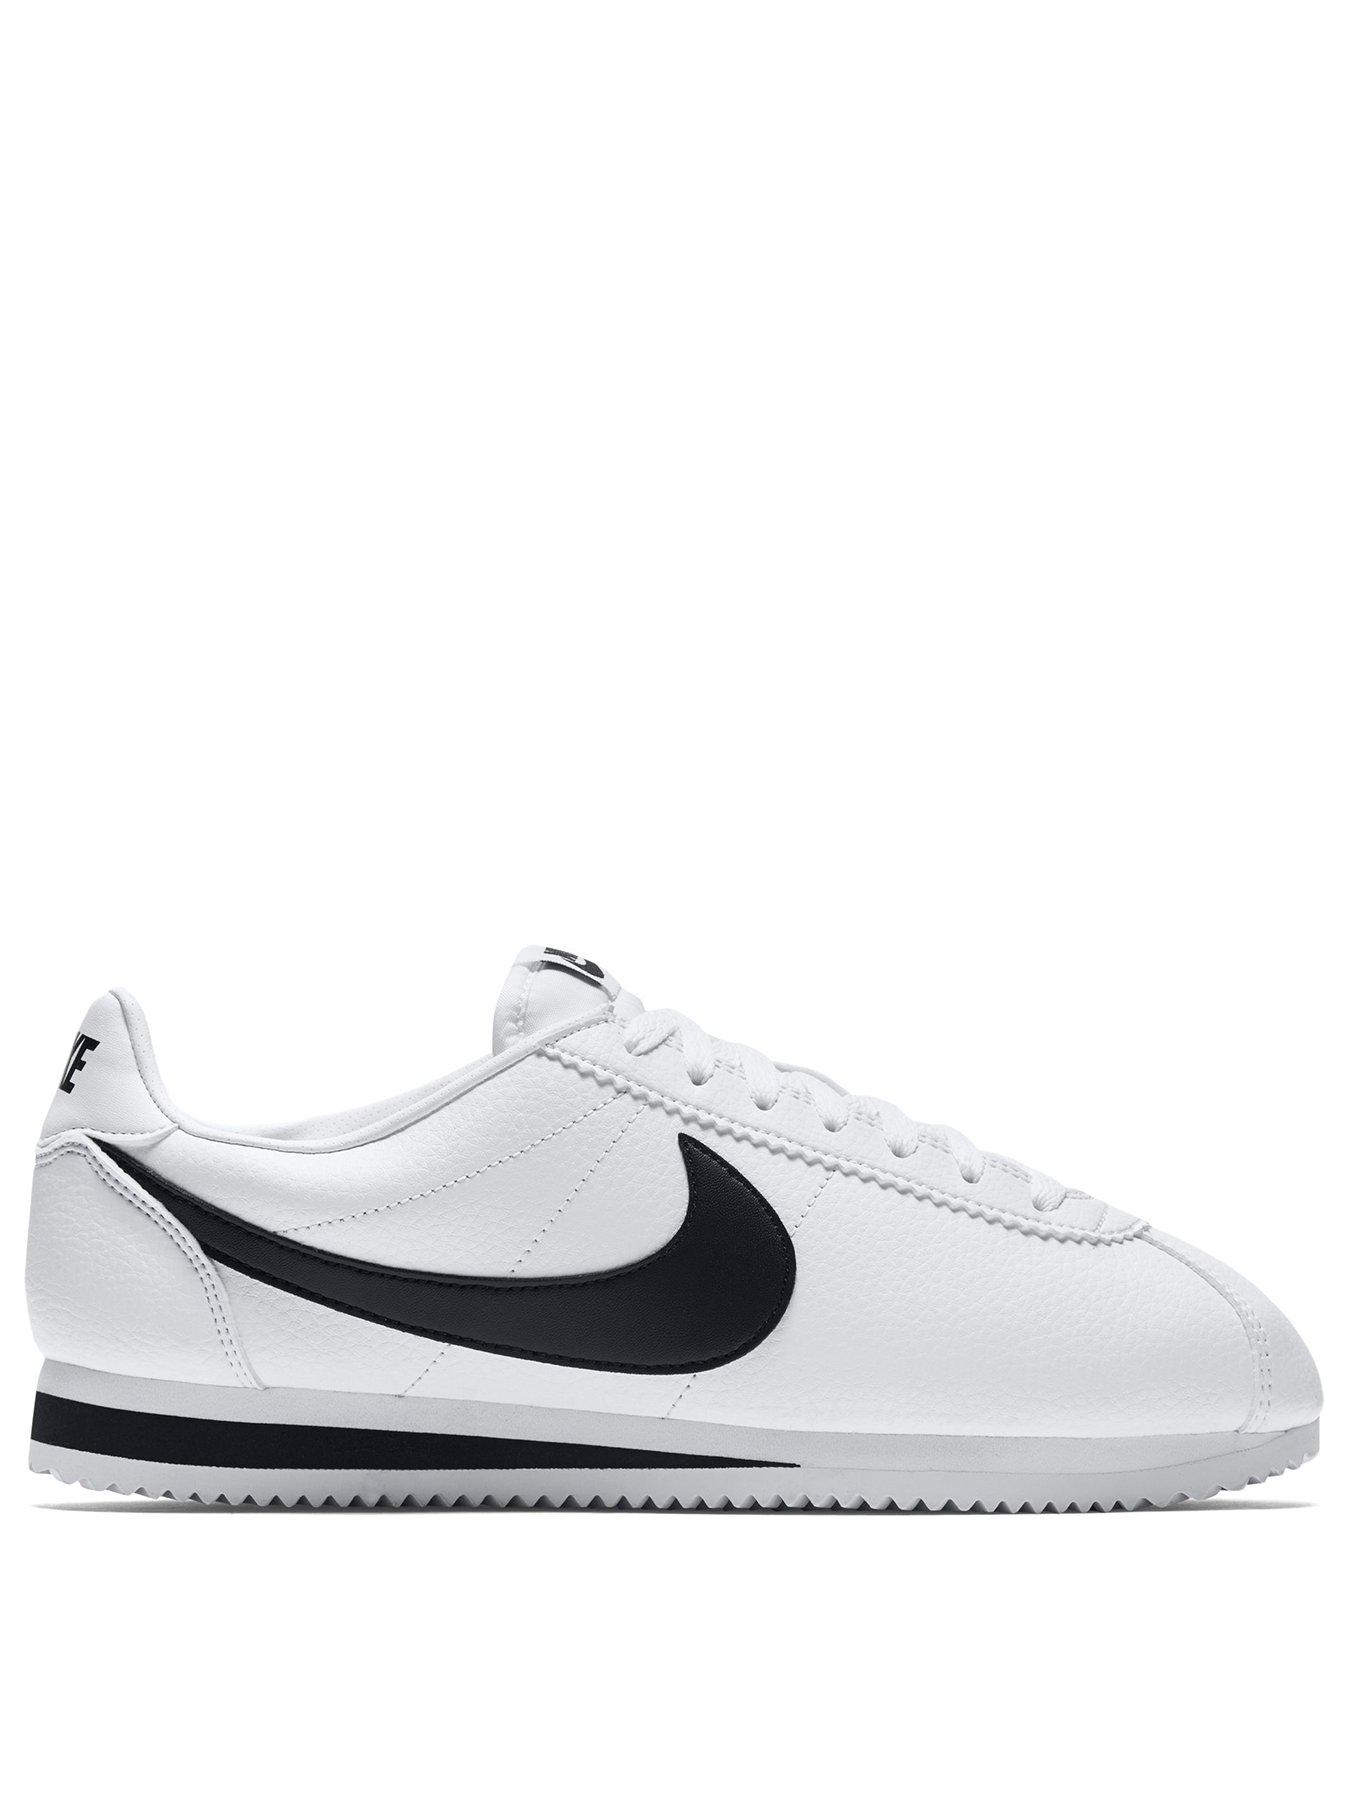 nike cortez leather white factory store 